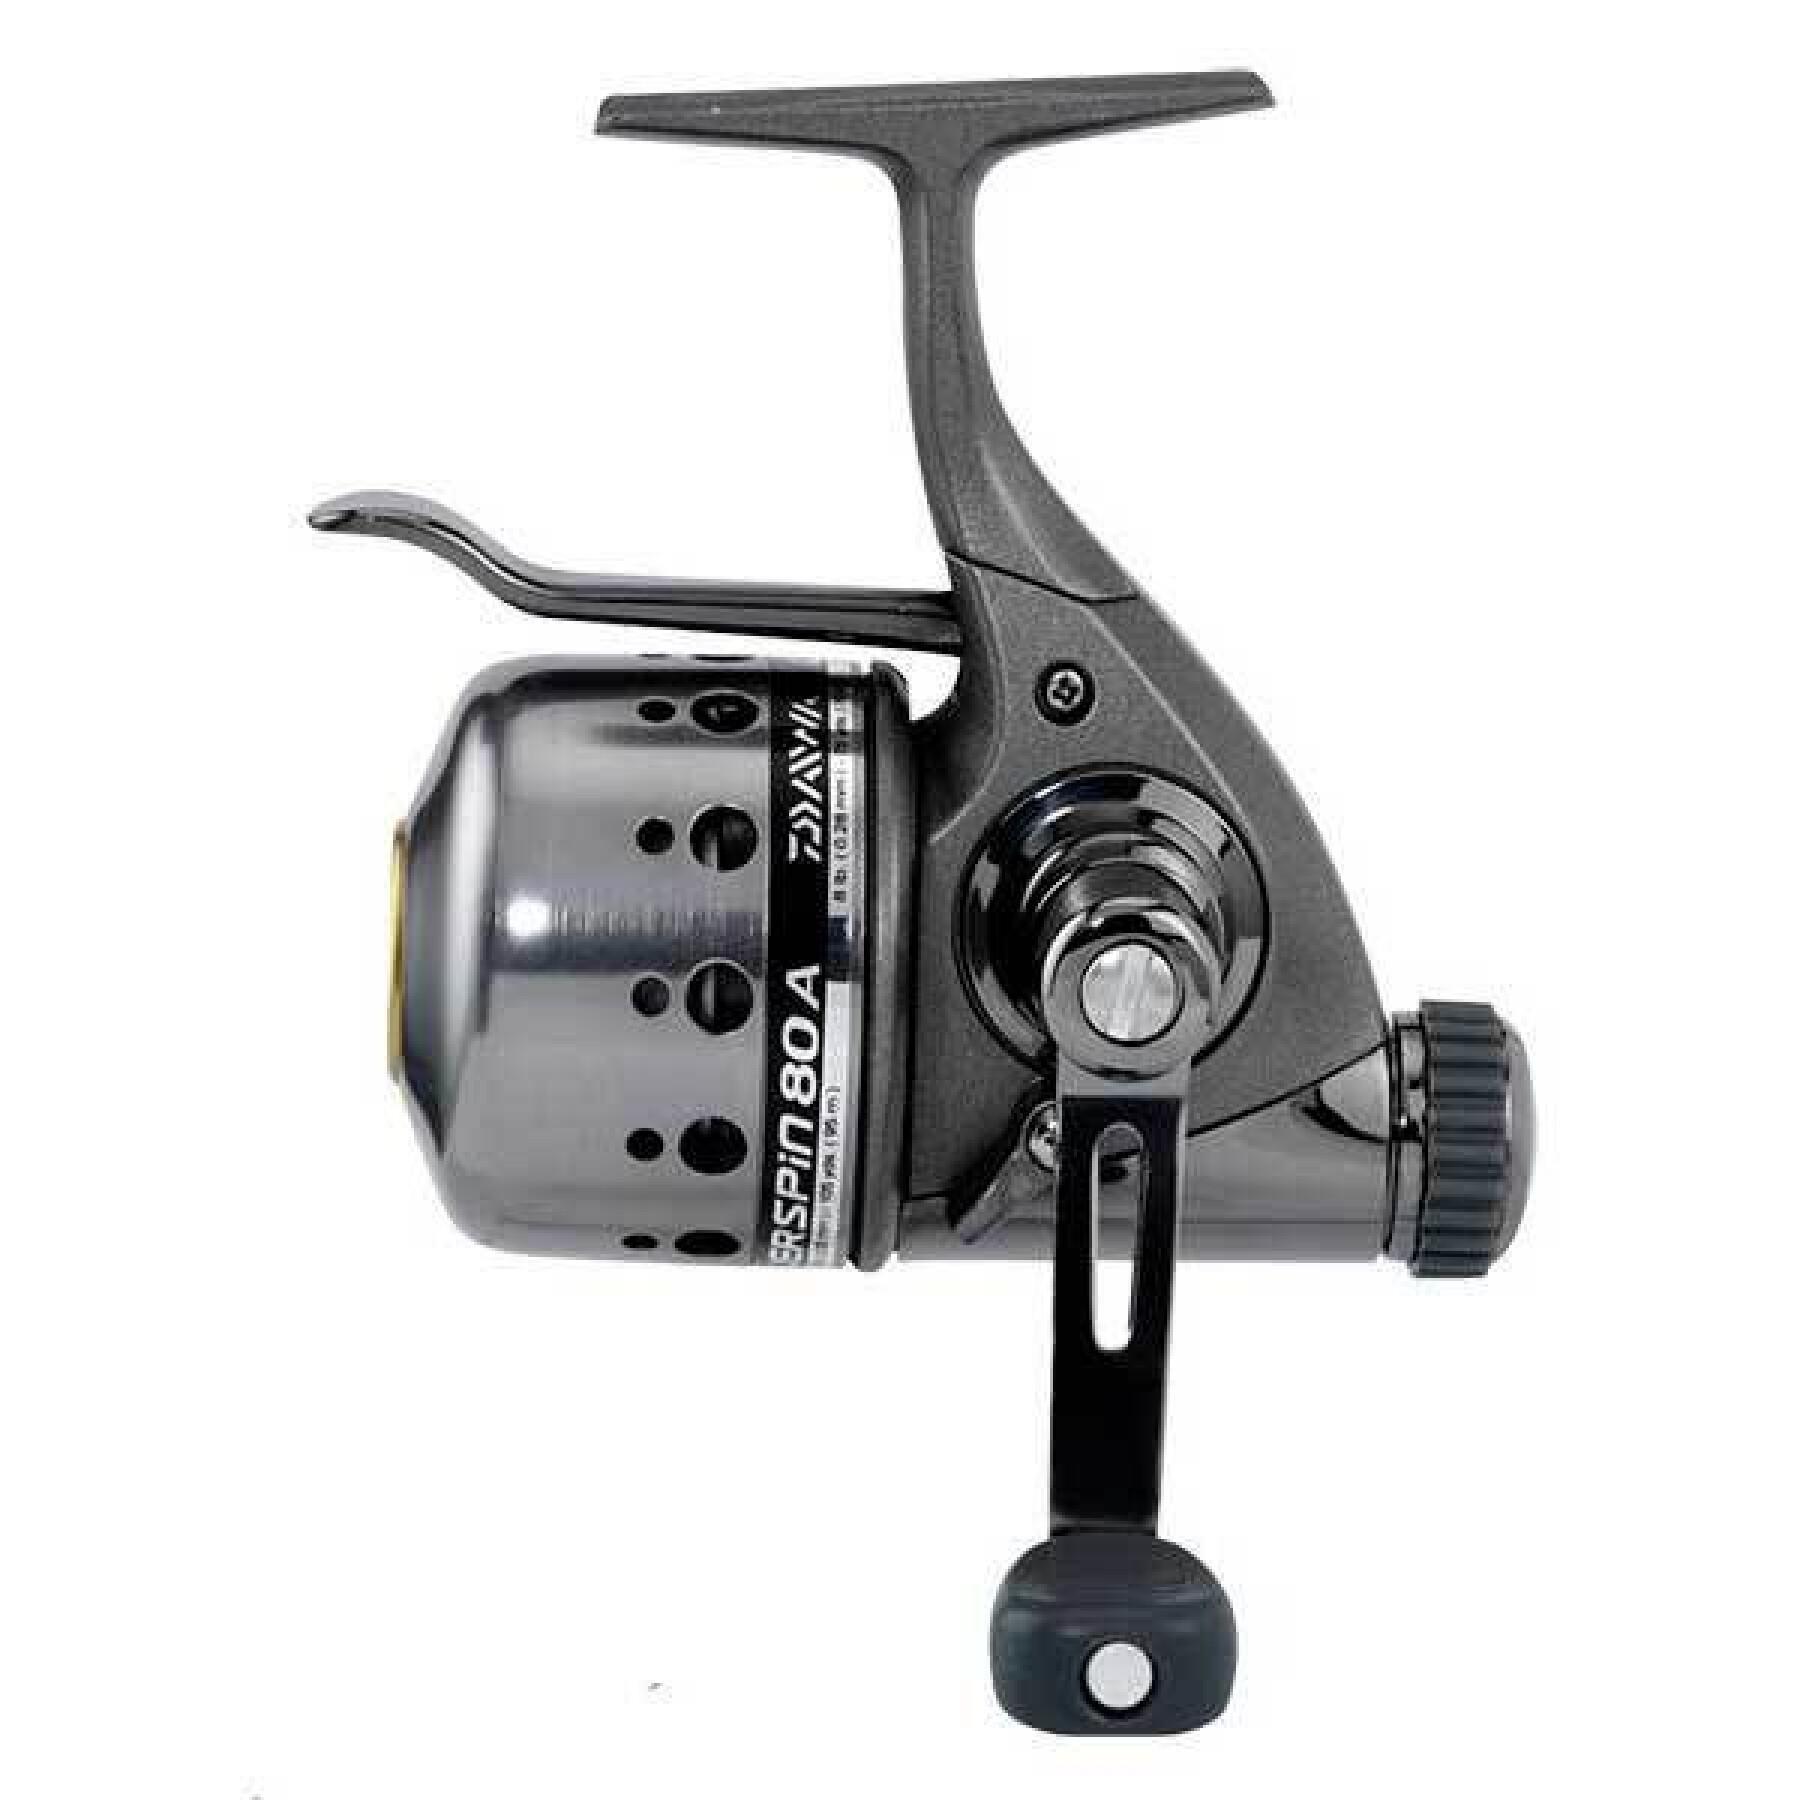  Daiwa Spinning Reel 14 Underspin 80 : Sports & Outdoors